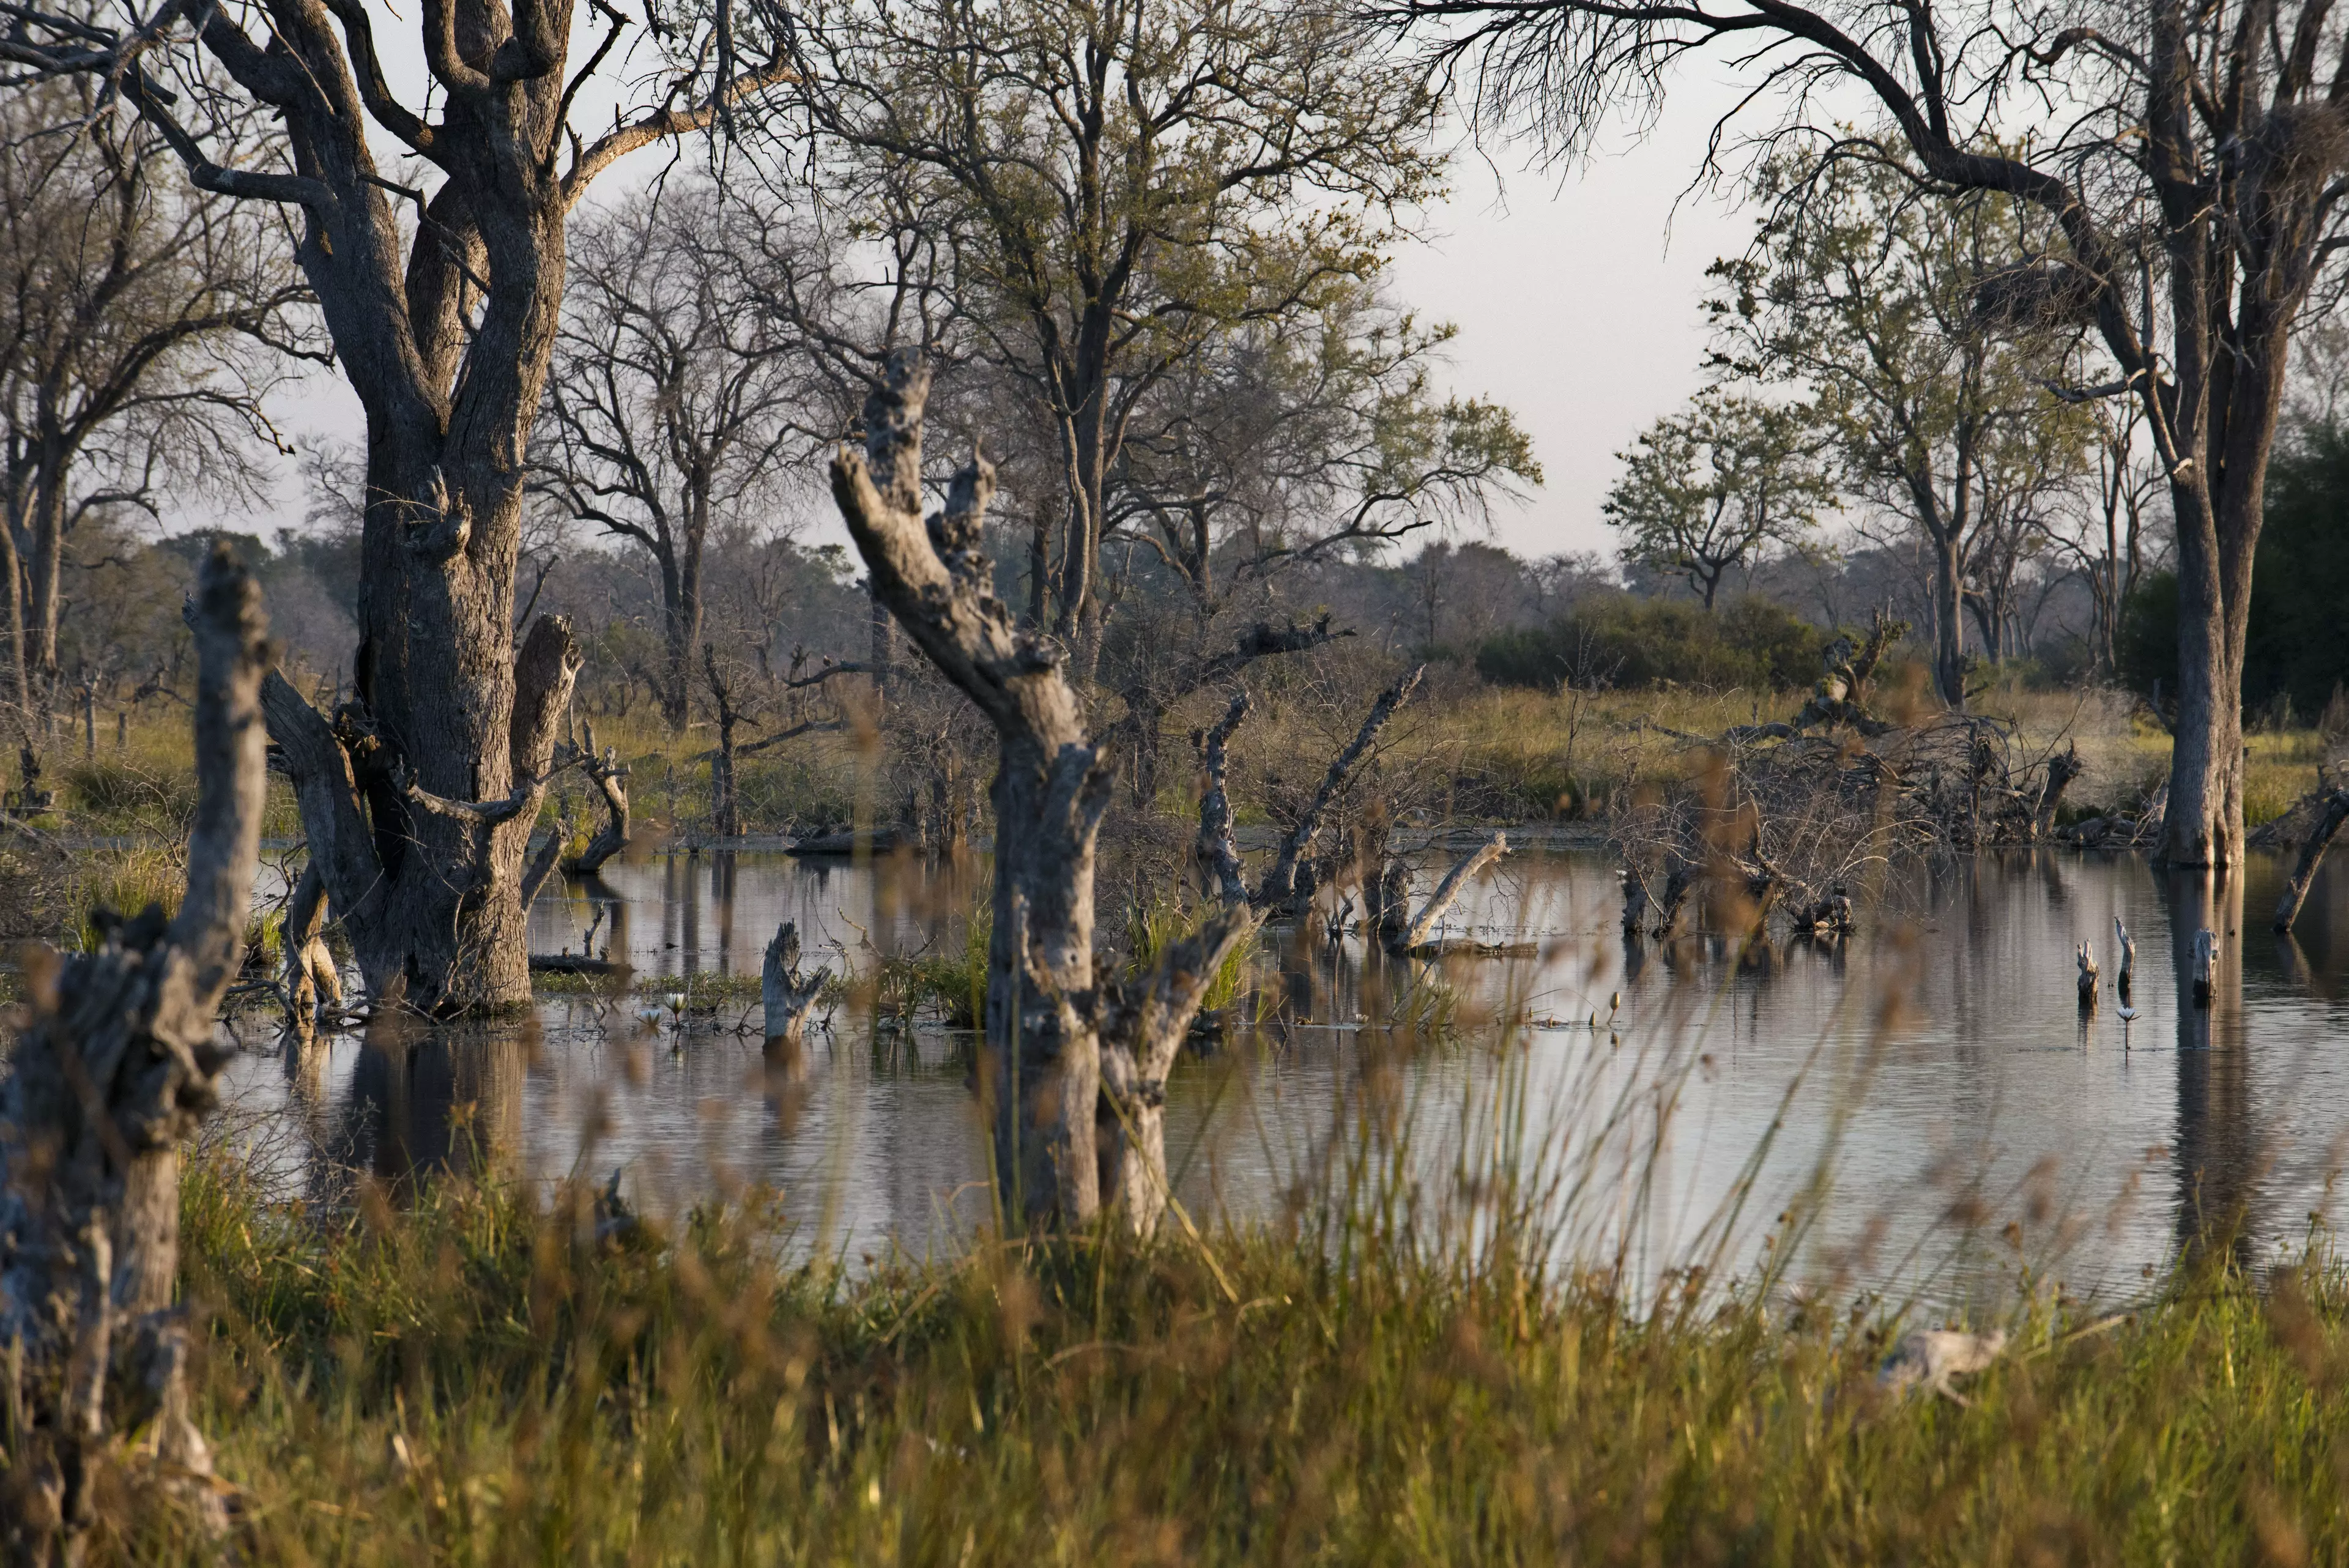 The Okavango Delta - a similar climate to what the first humans would have lived in.